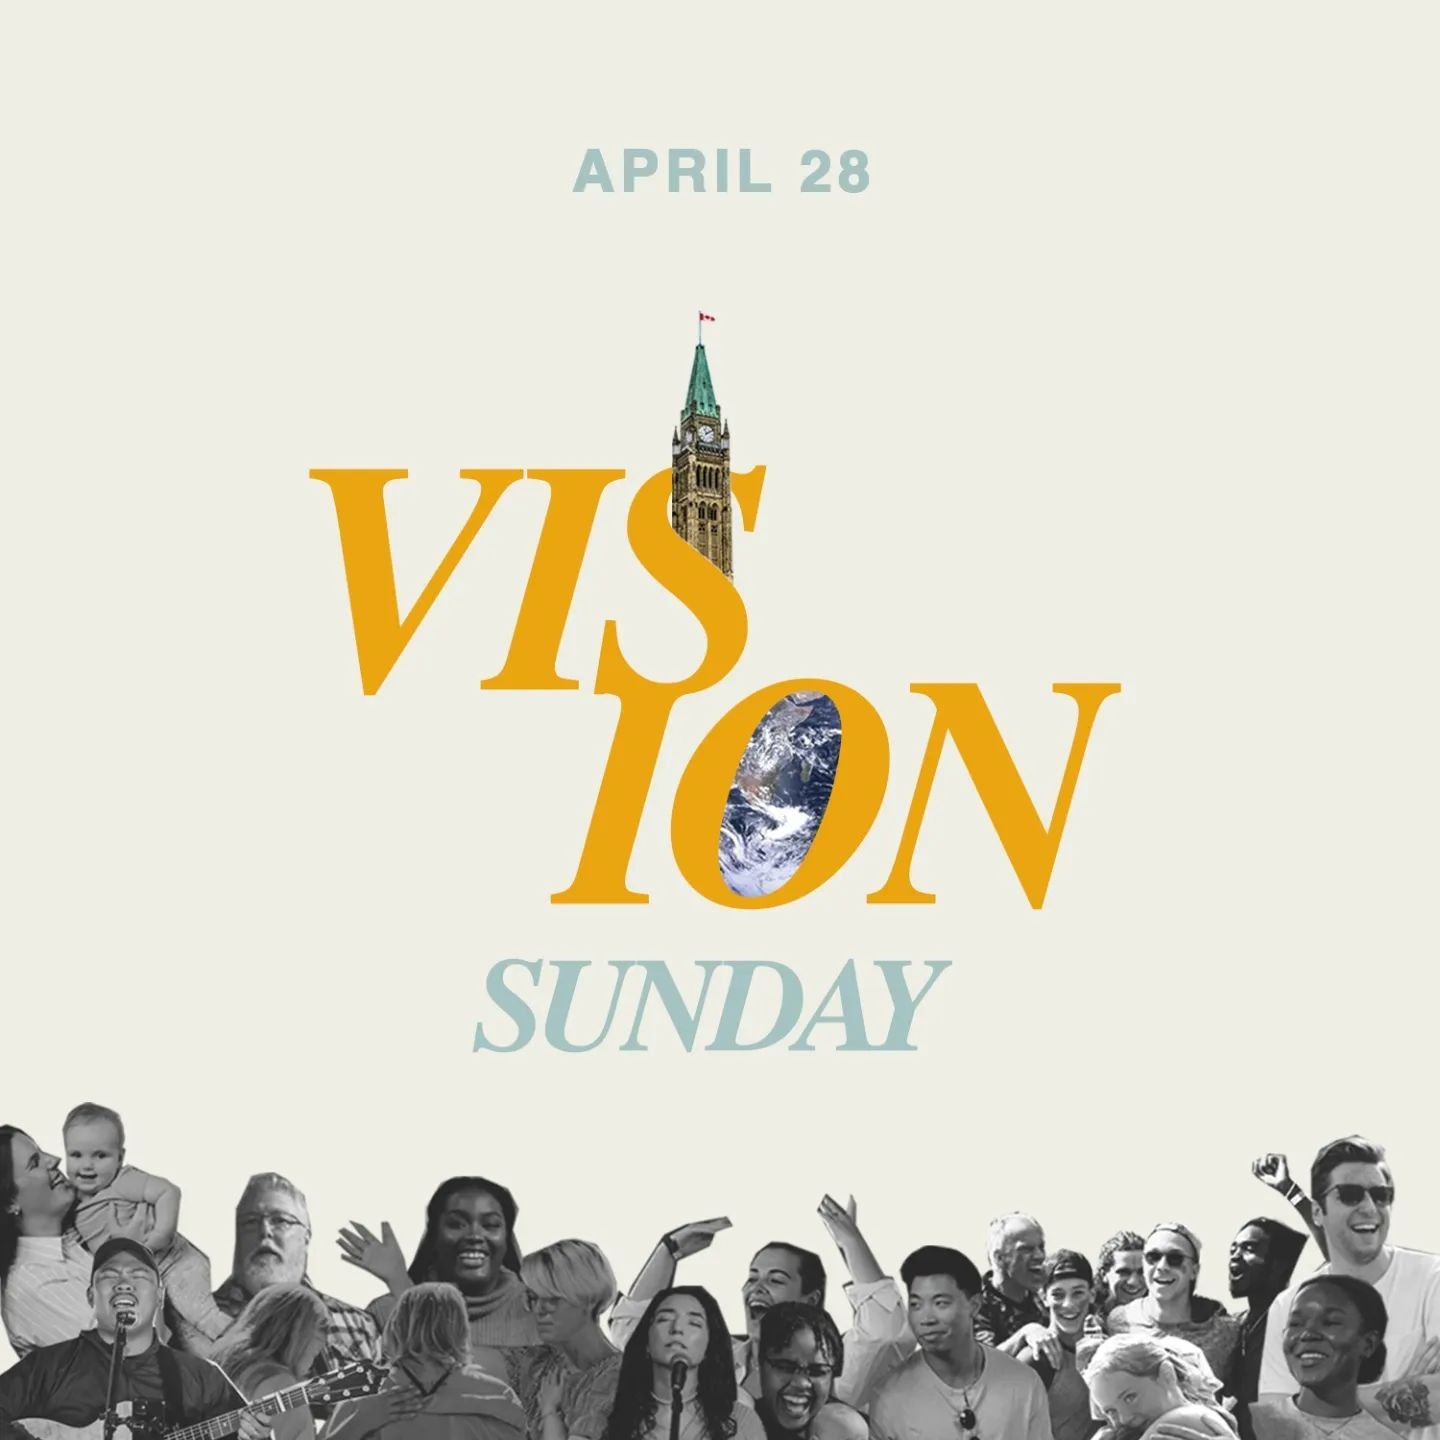 🎉 This Sunday 3pm - VISION SUNDAY! 🎉 We'll be hearing from Alex &amp; Caleb about the Heart and Vision of our church. 🙌

If you're new to local, have been around since the start, or have joined in on the fun anywhere in between it's one of those w